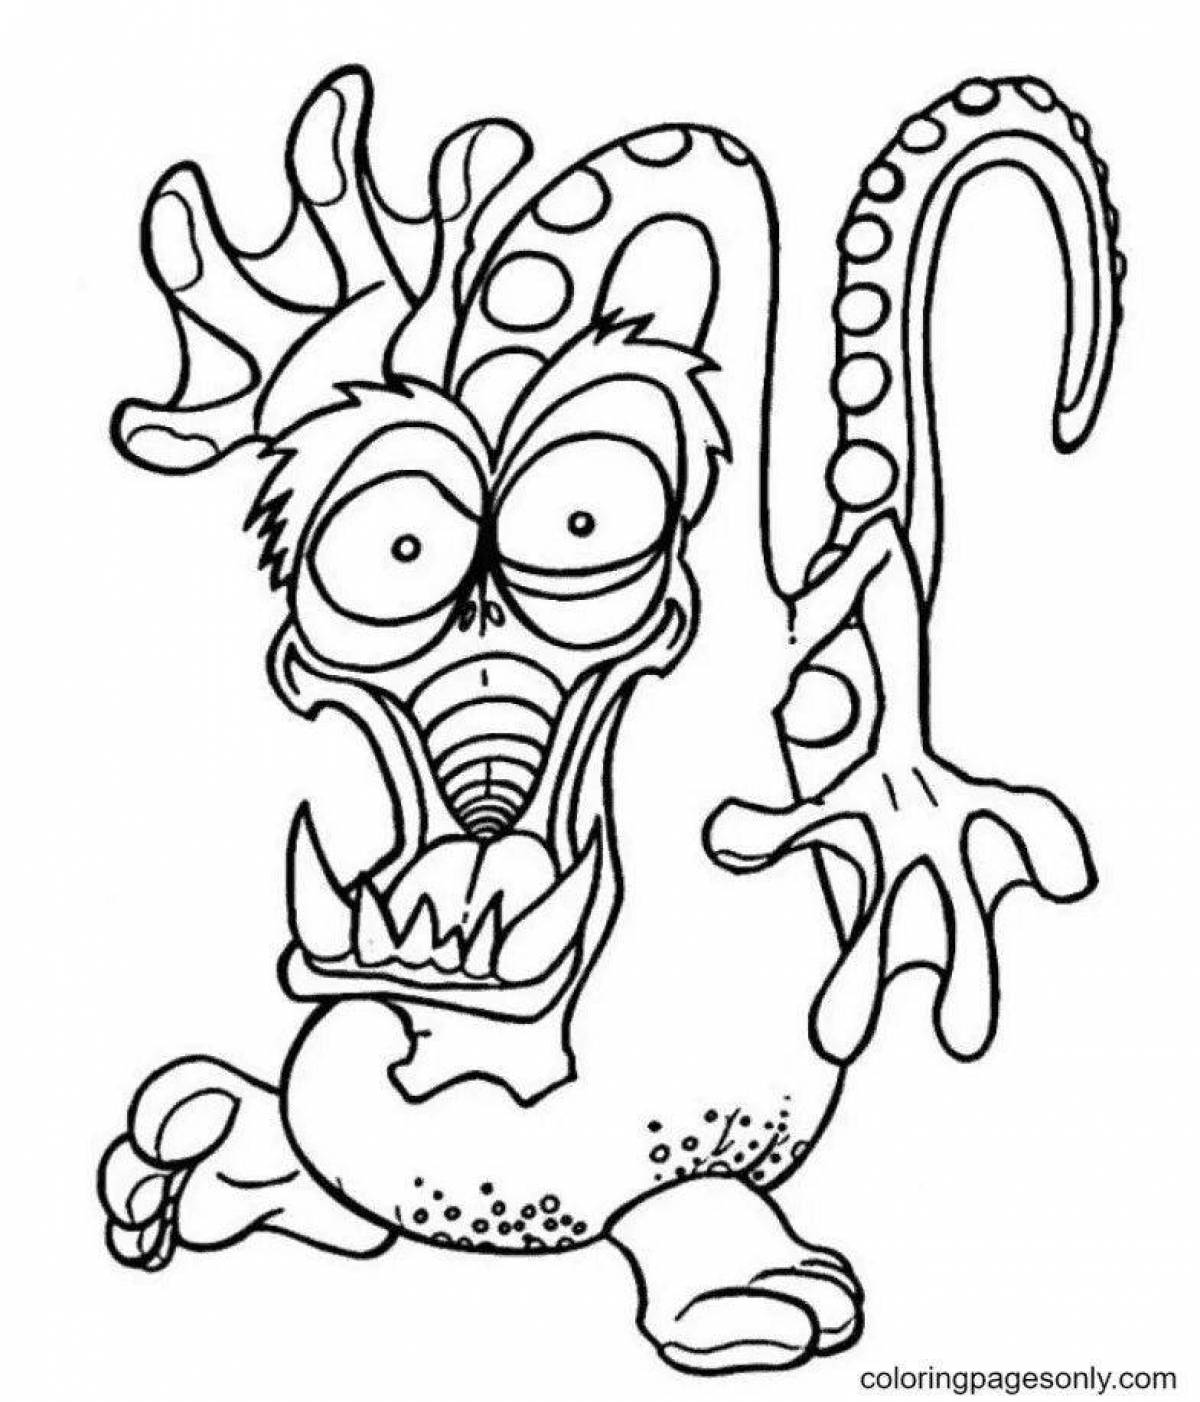 Bright blue monster coloring page